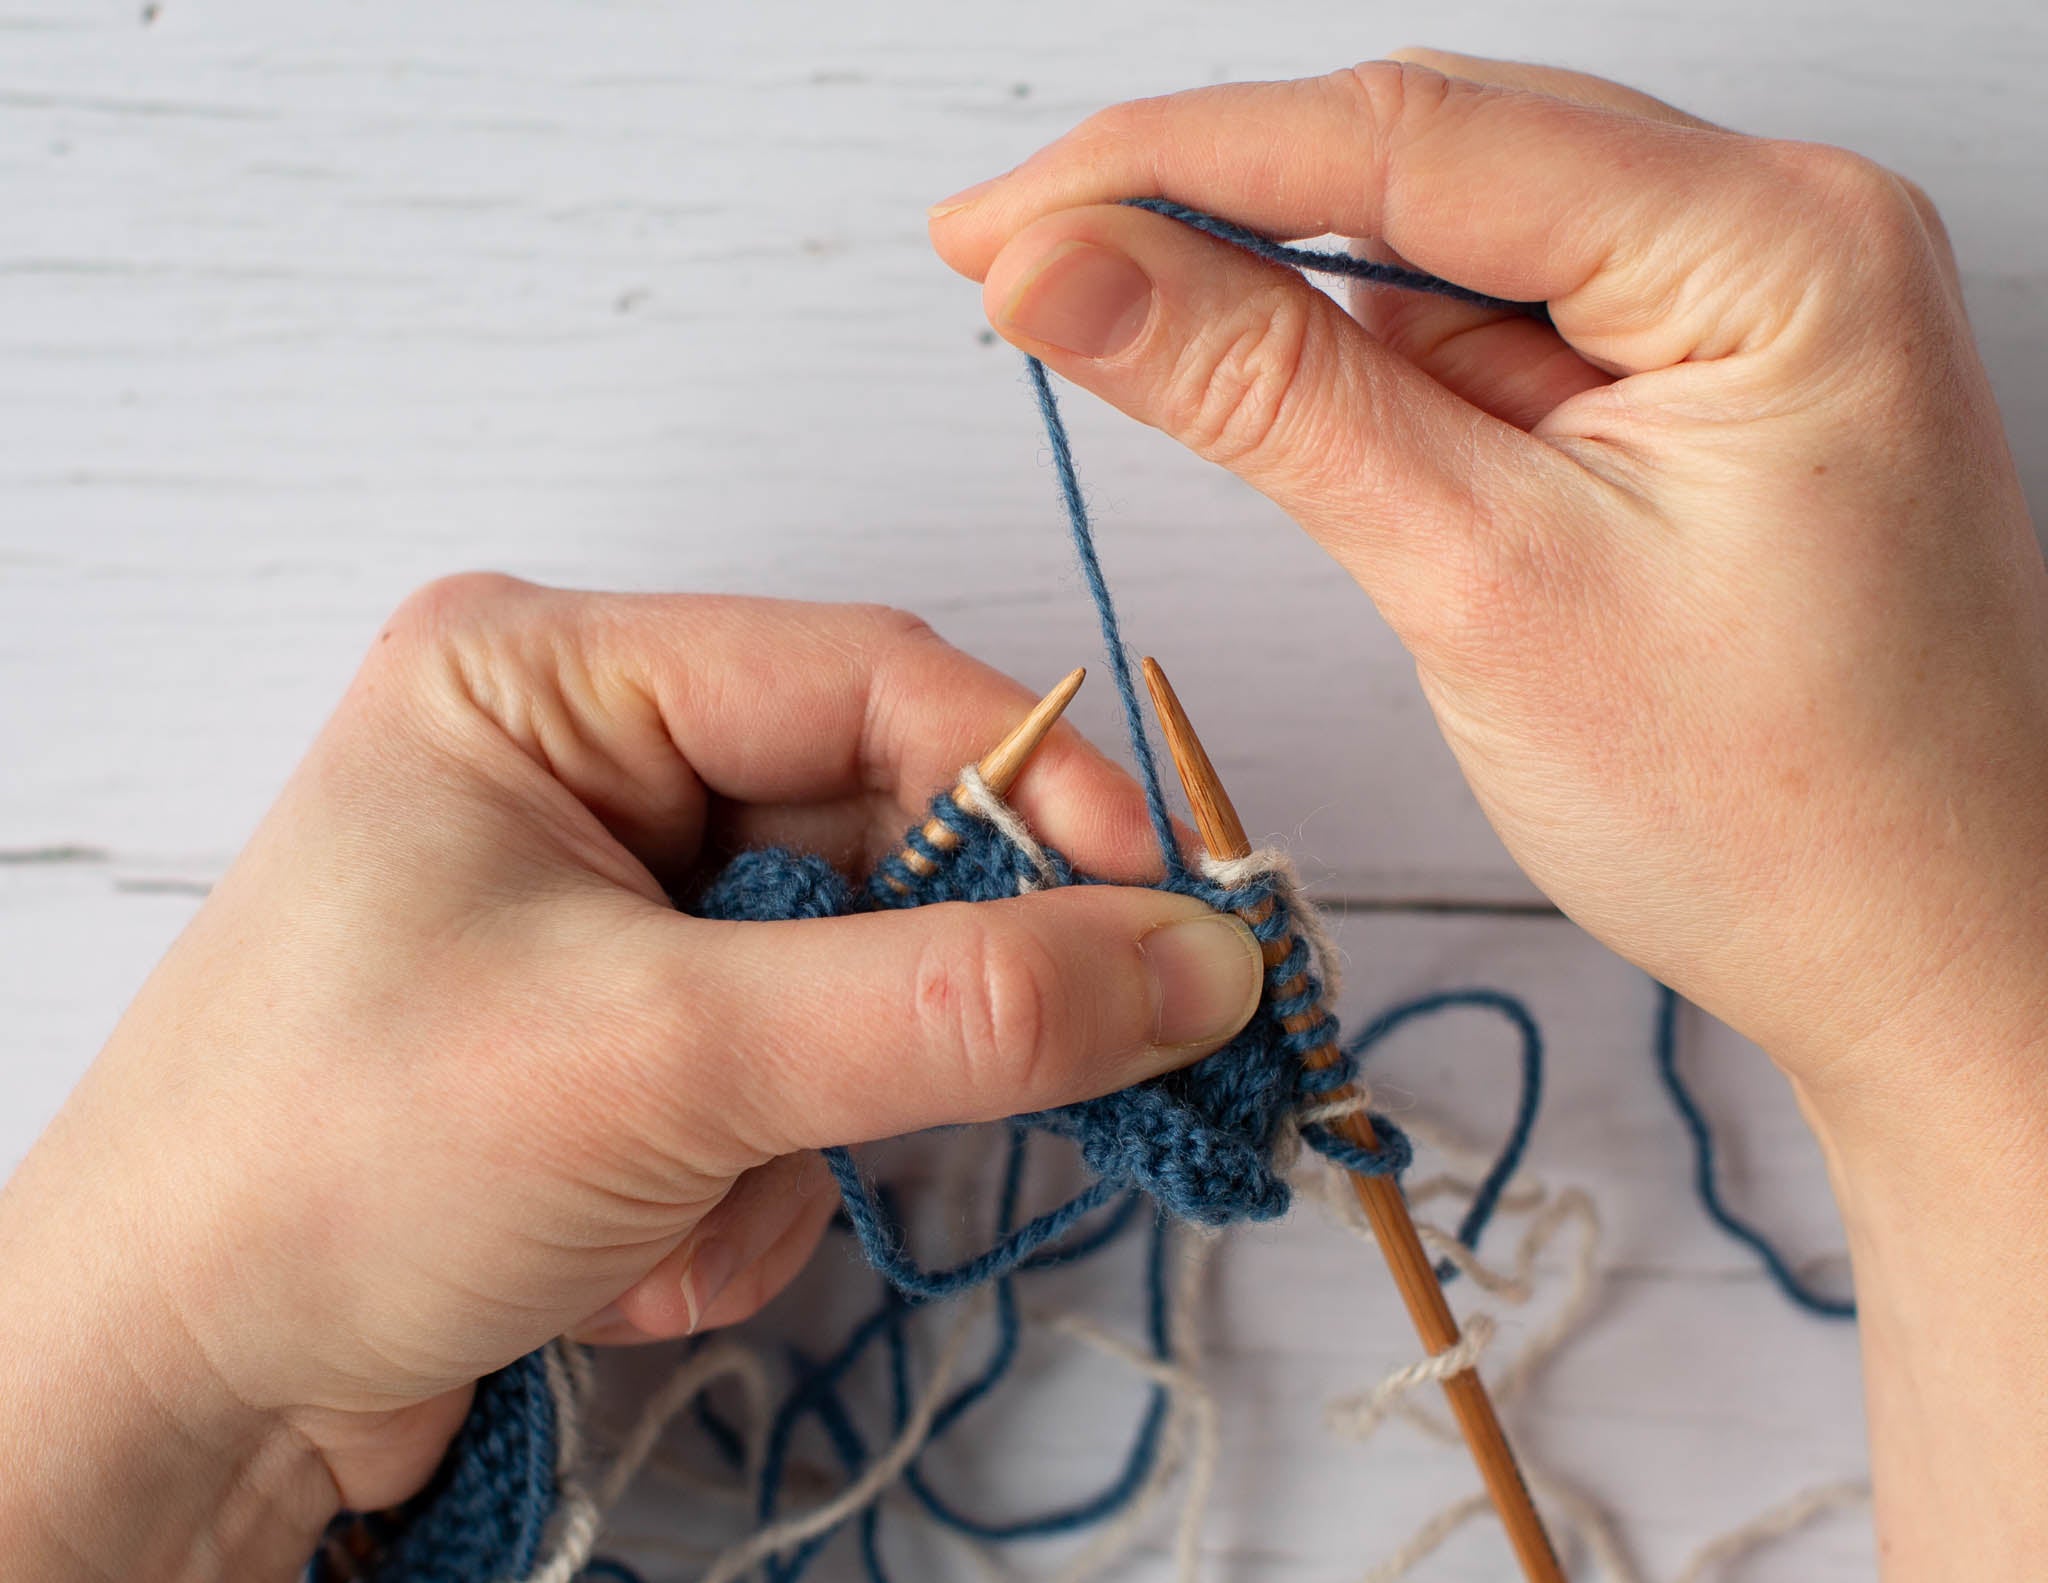 Two white hands holding a piece of blue and white knitting over a flat surface. The knitting is on two wooden needles and the right hand holds a strand of blue yarn high above the knitting in the centre.